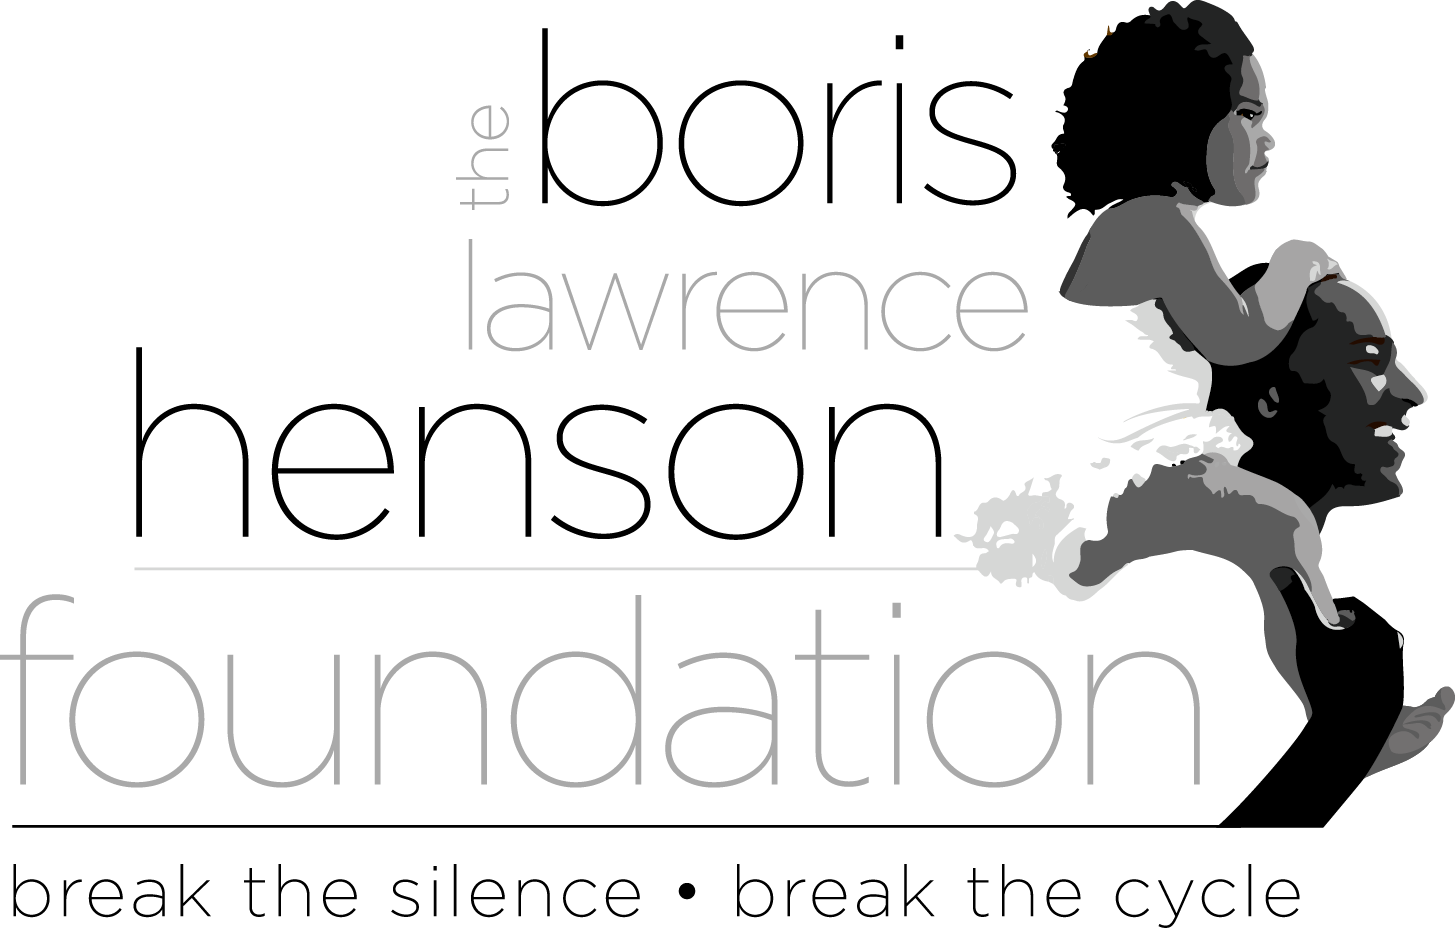 A black and white image of the logo for the lawrence foundation.